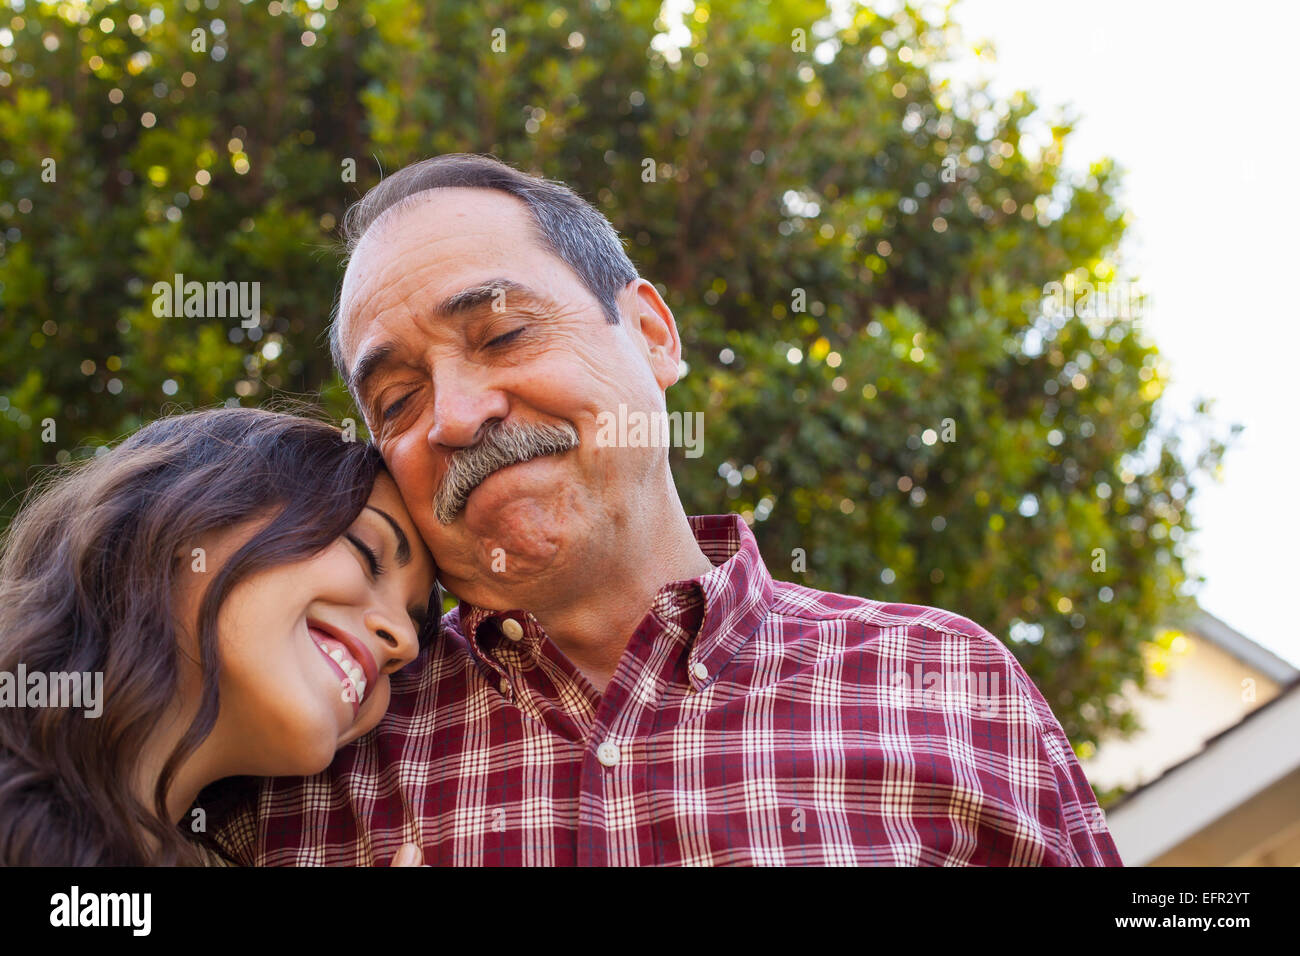 Father and daughter sharing tender moment Stock Photo